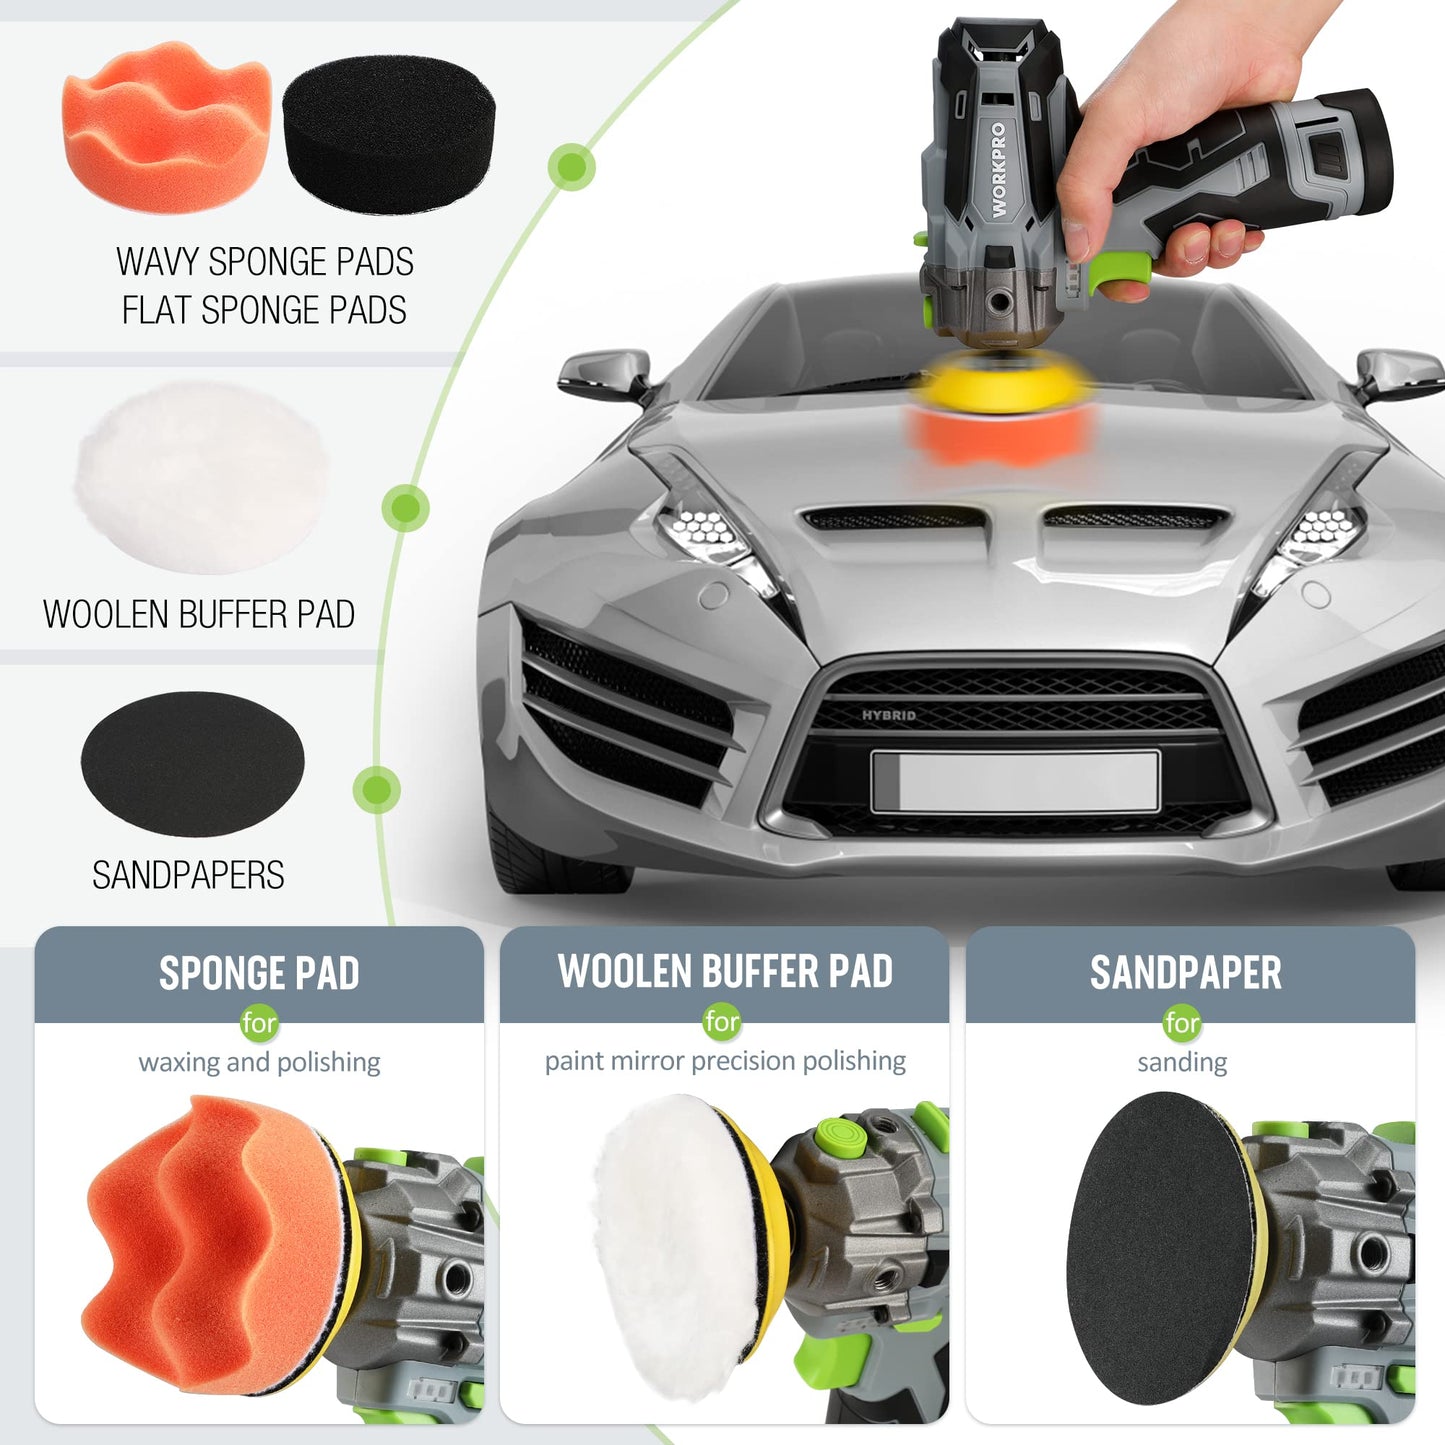 WORKPRO 12V Cordless Polisher, 3" Mini Car Detailing Buffer & Sander Machine Kit with 2 Li-Ion Batteries, Variable Speed Trigger for Auto/DIY